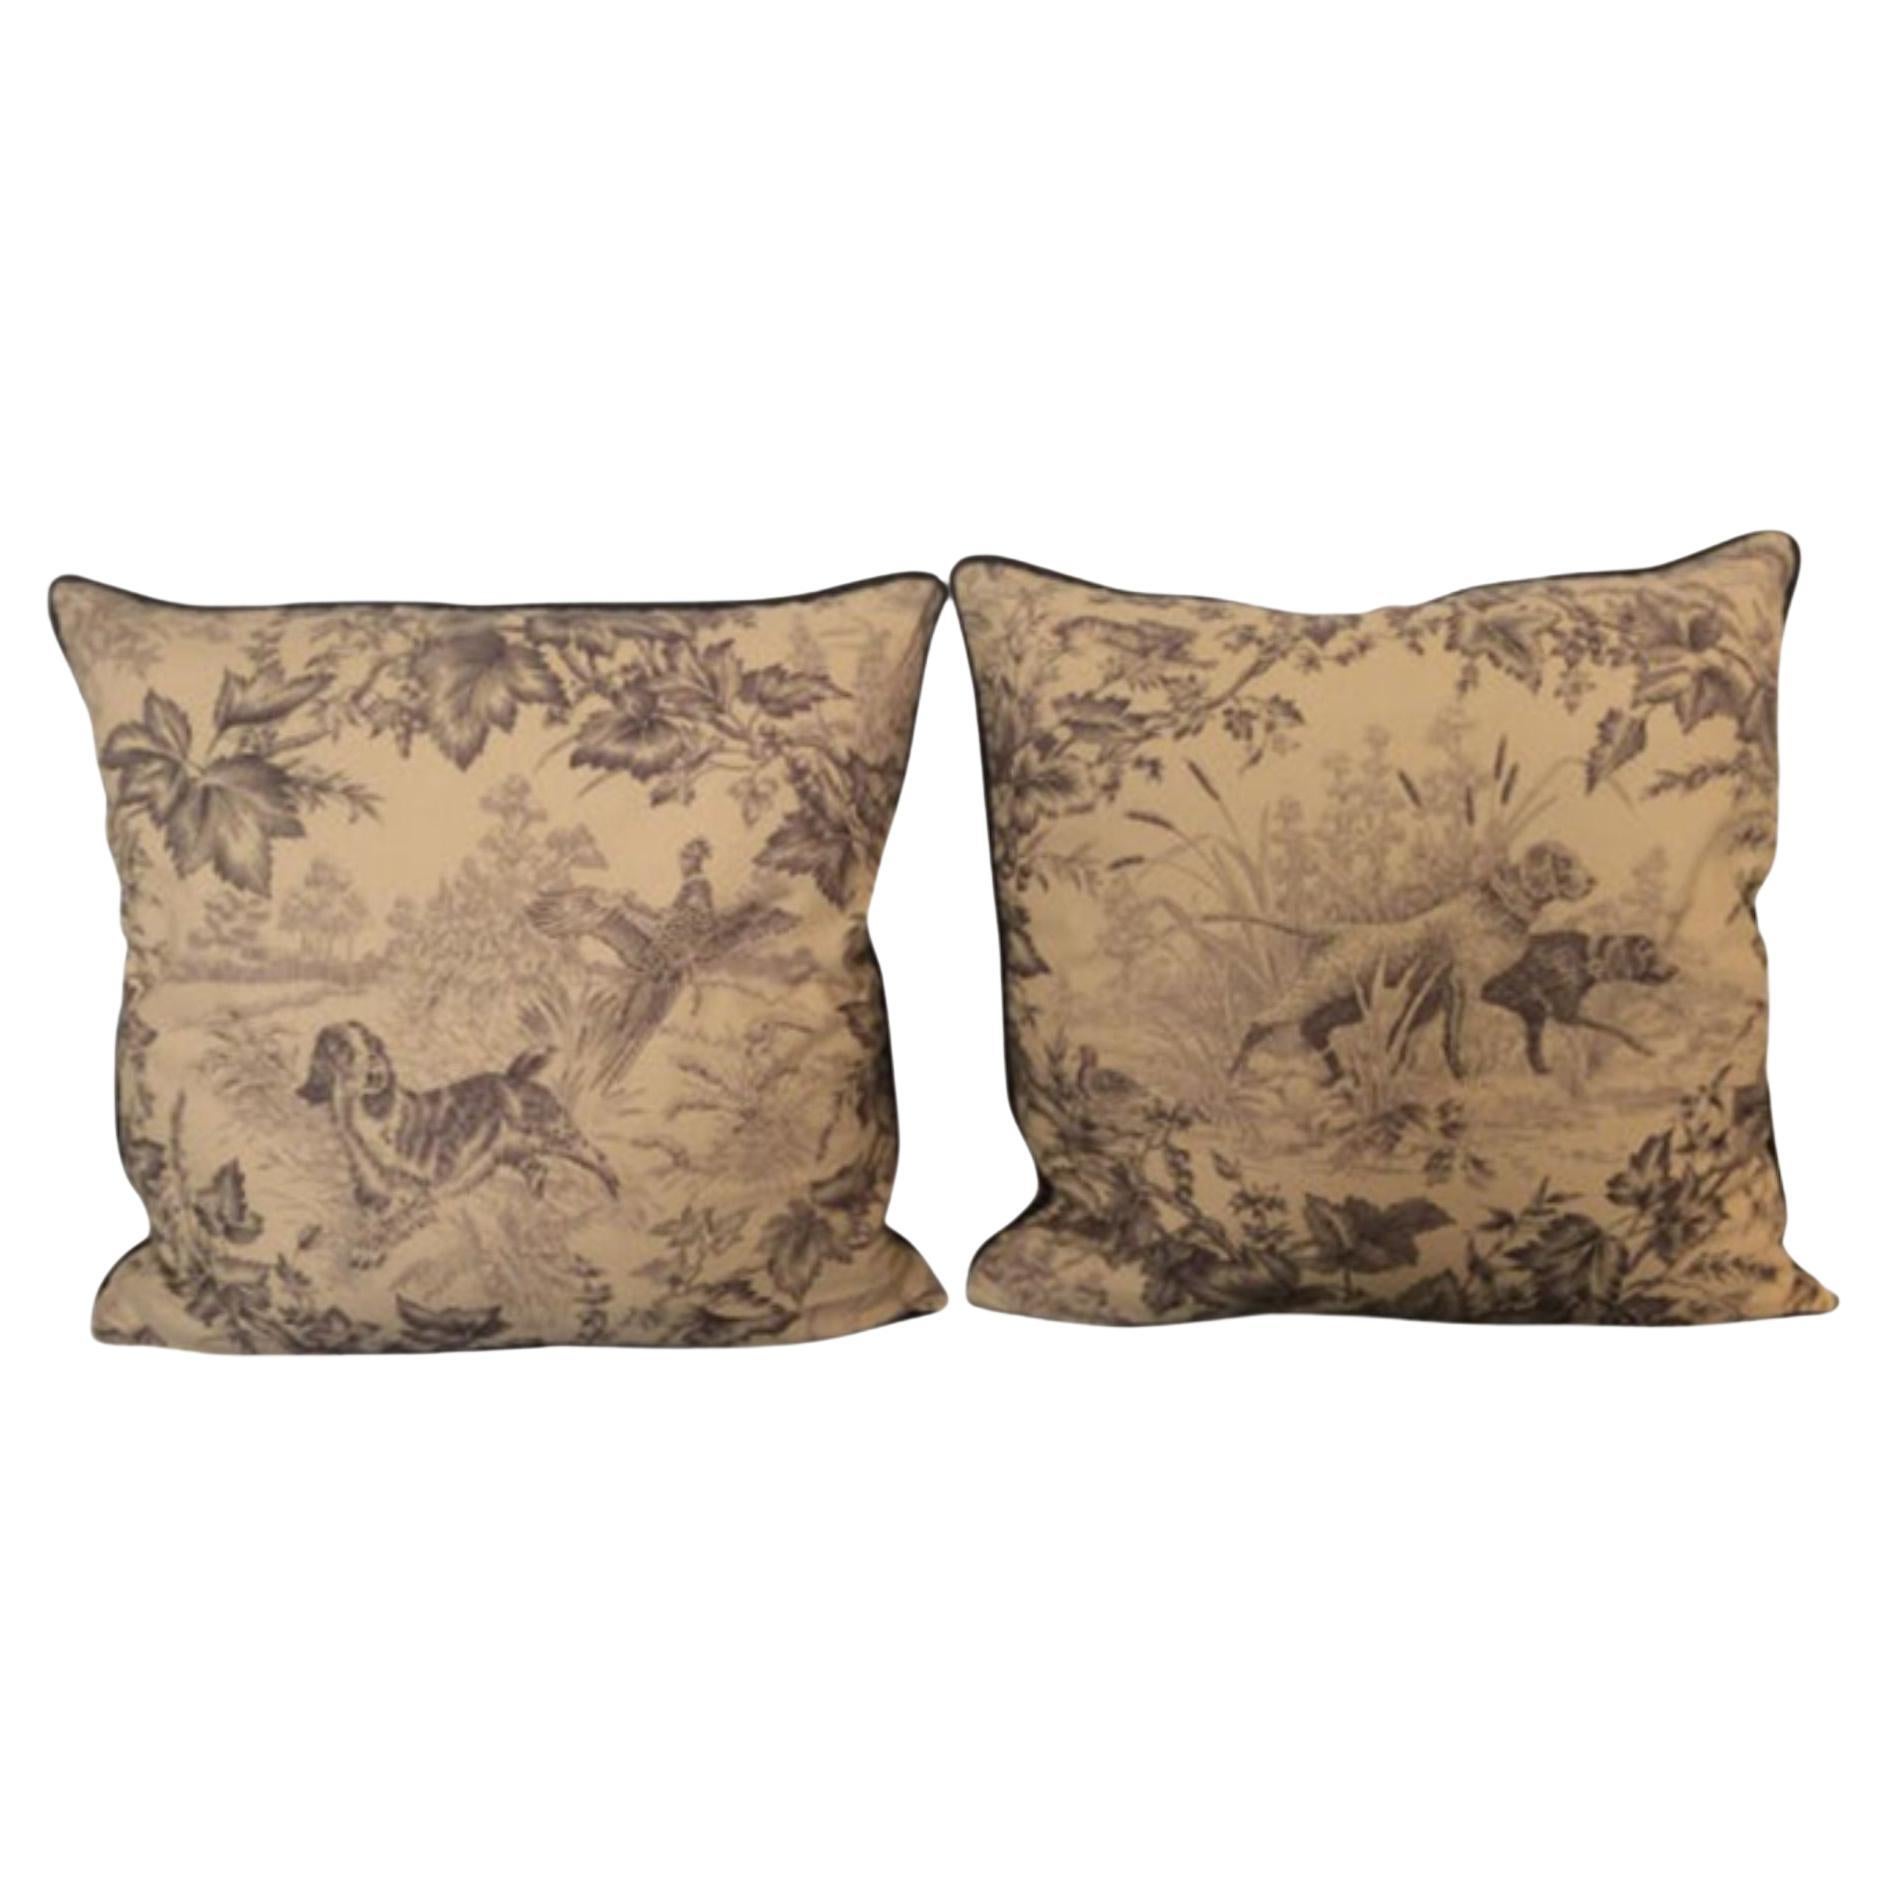 Brunschwig & Fils “On Point”-Hunting Toile in Tobacco and Cream-Pillows - a Pair For Sale